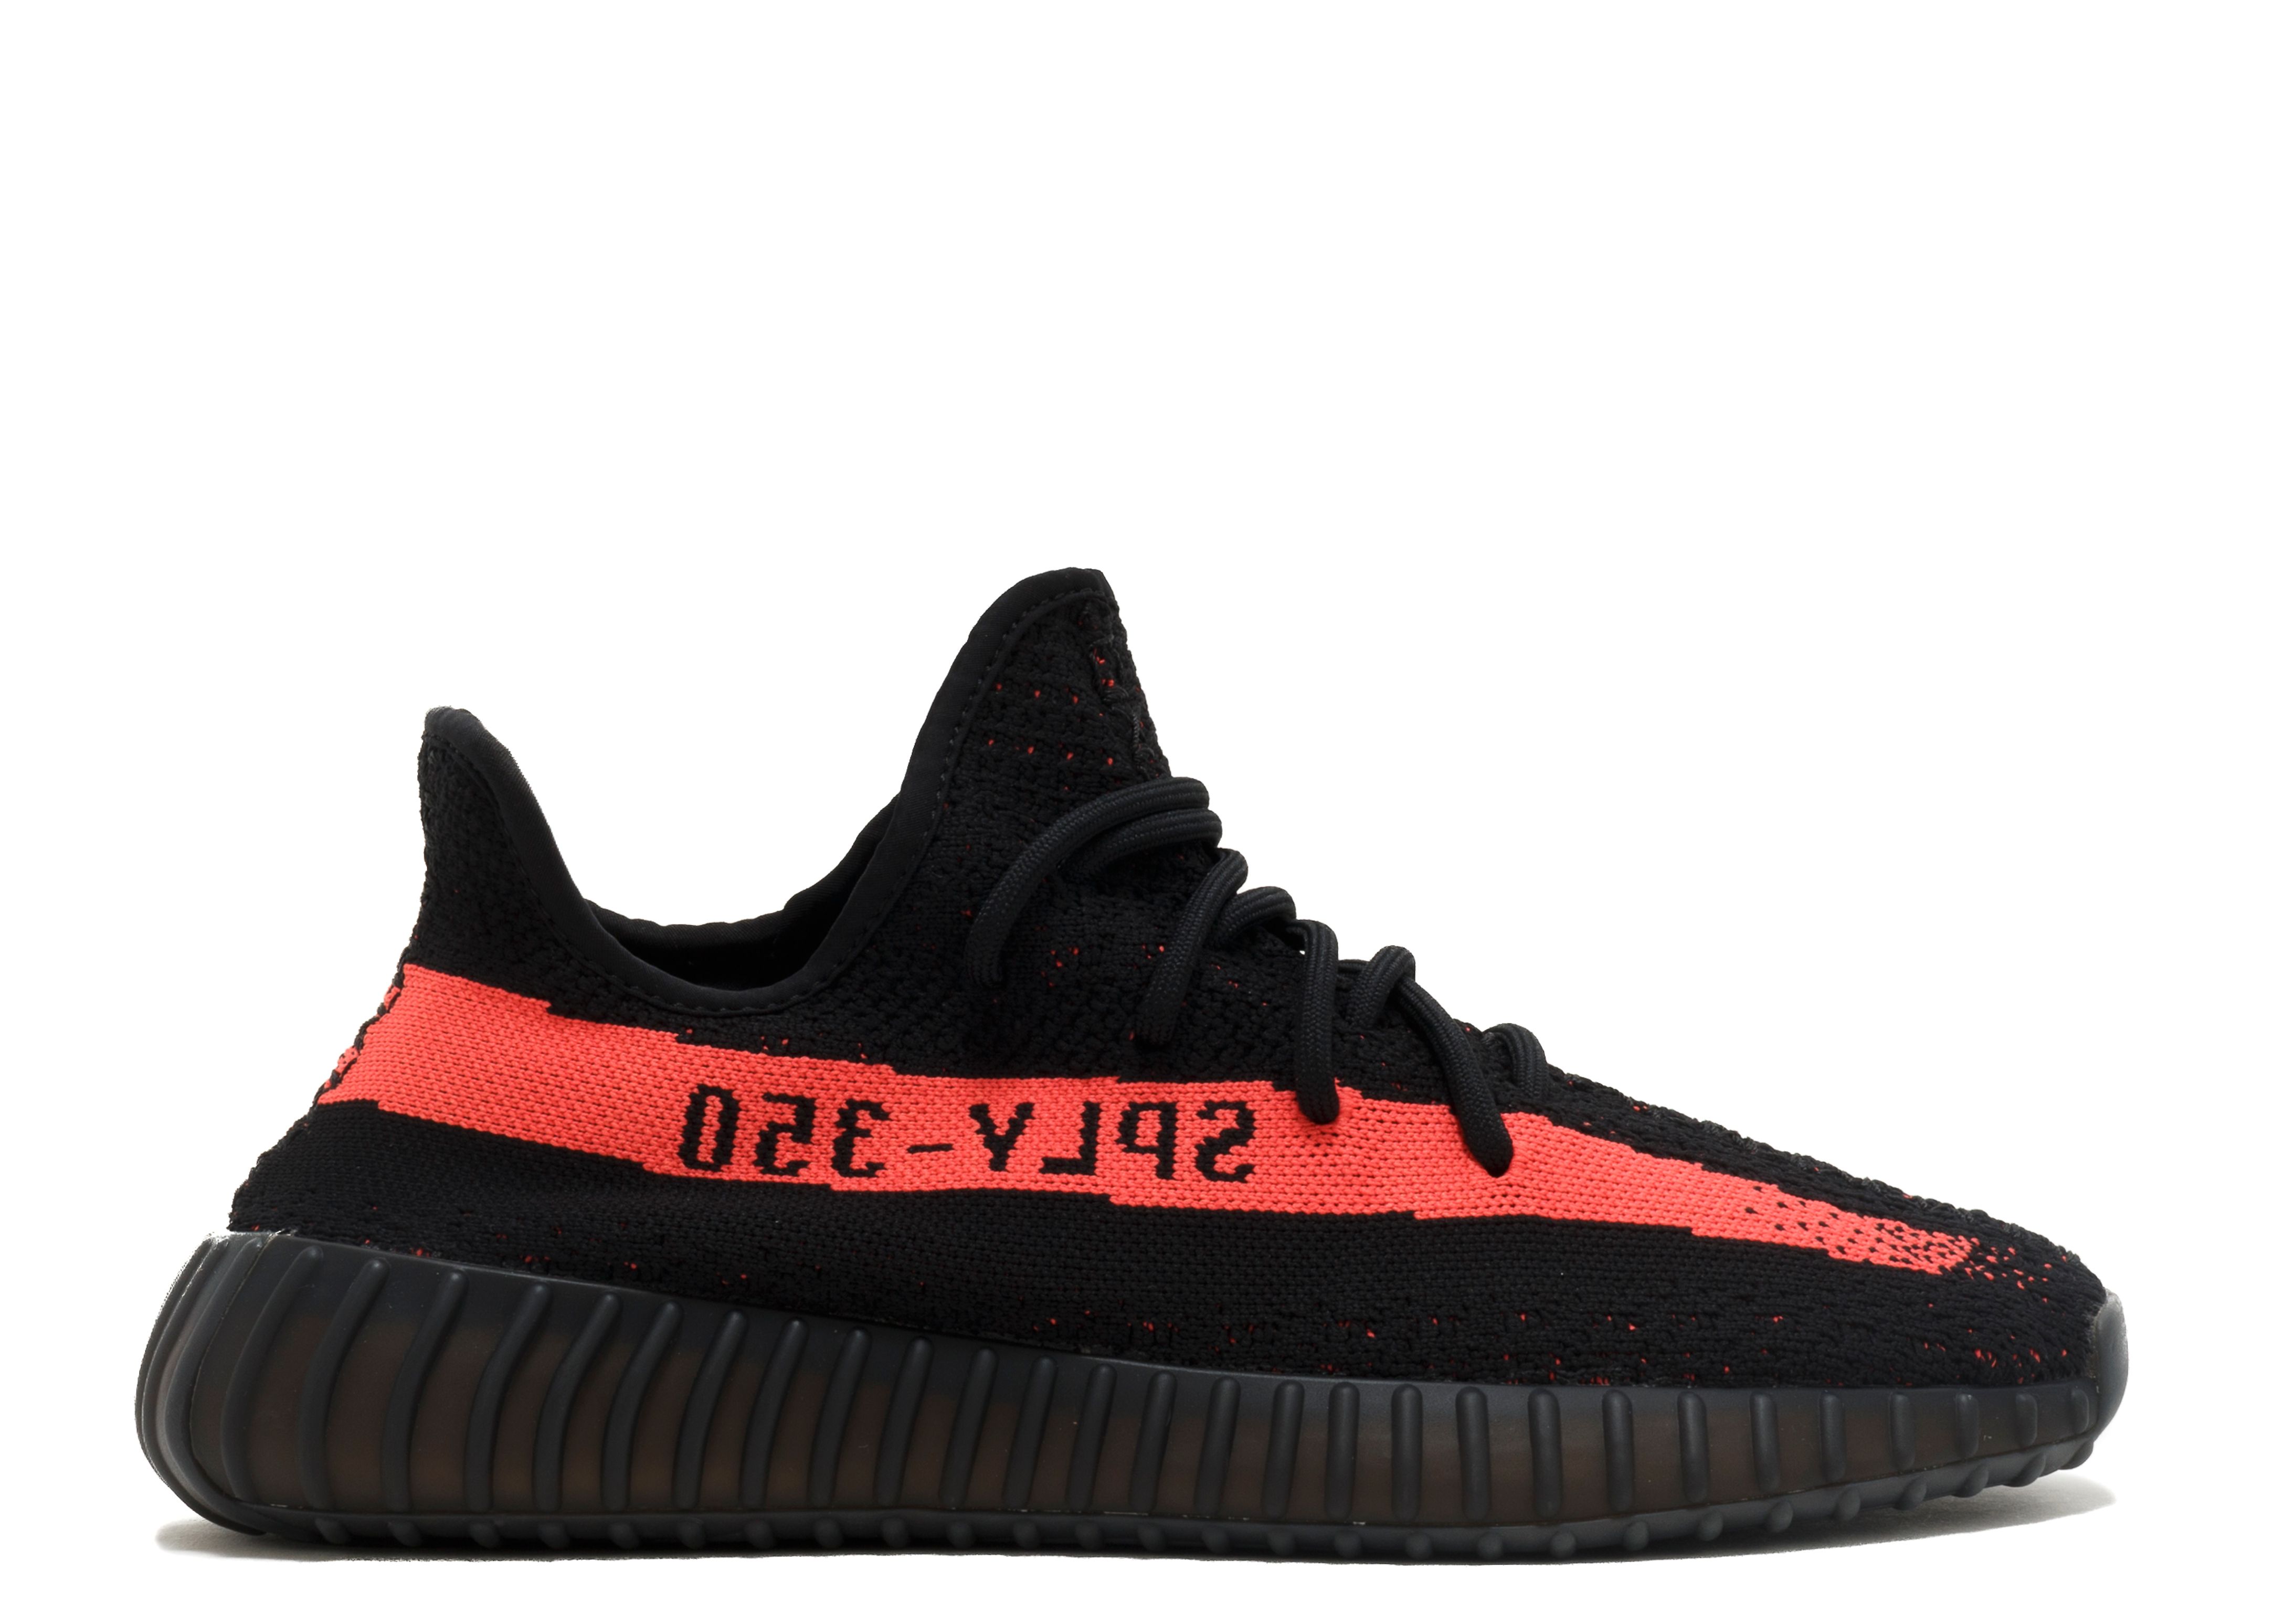 How to Get the Adidas Yeezy Boost 350 V2 'Black/White' Footwear